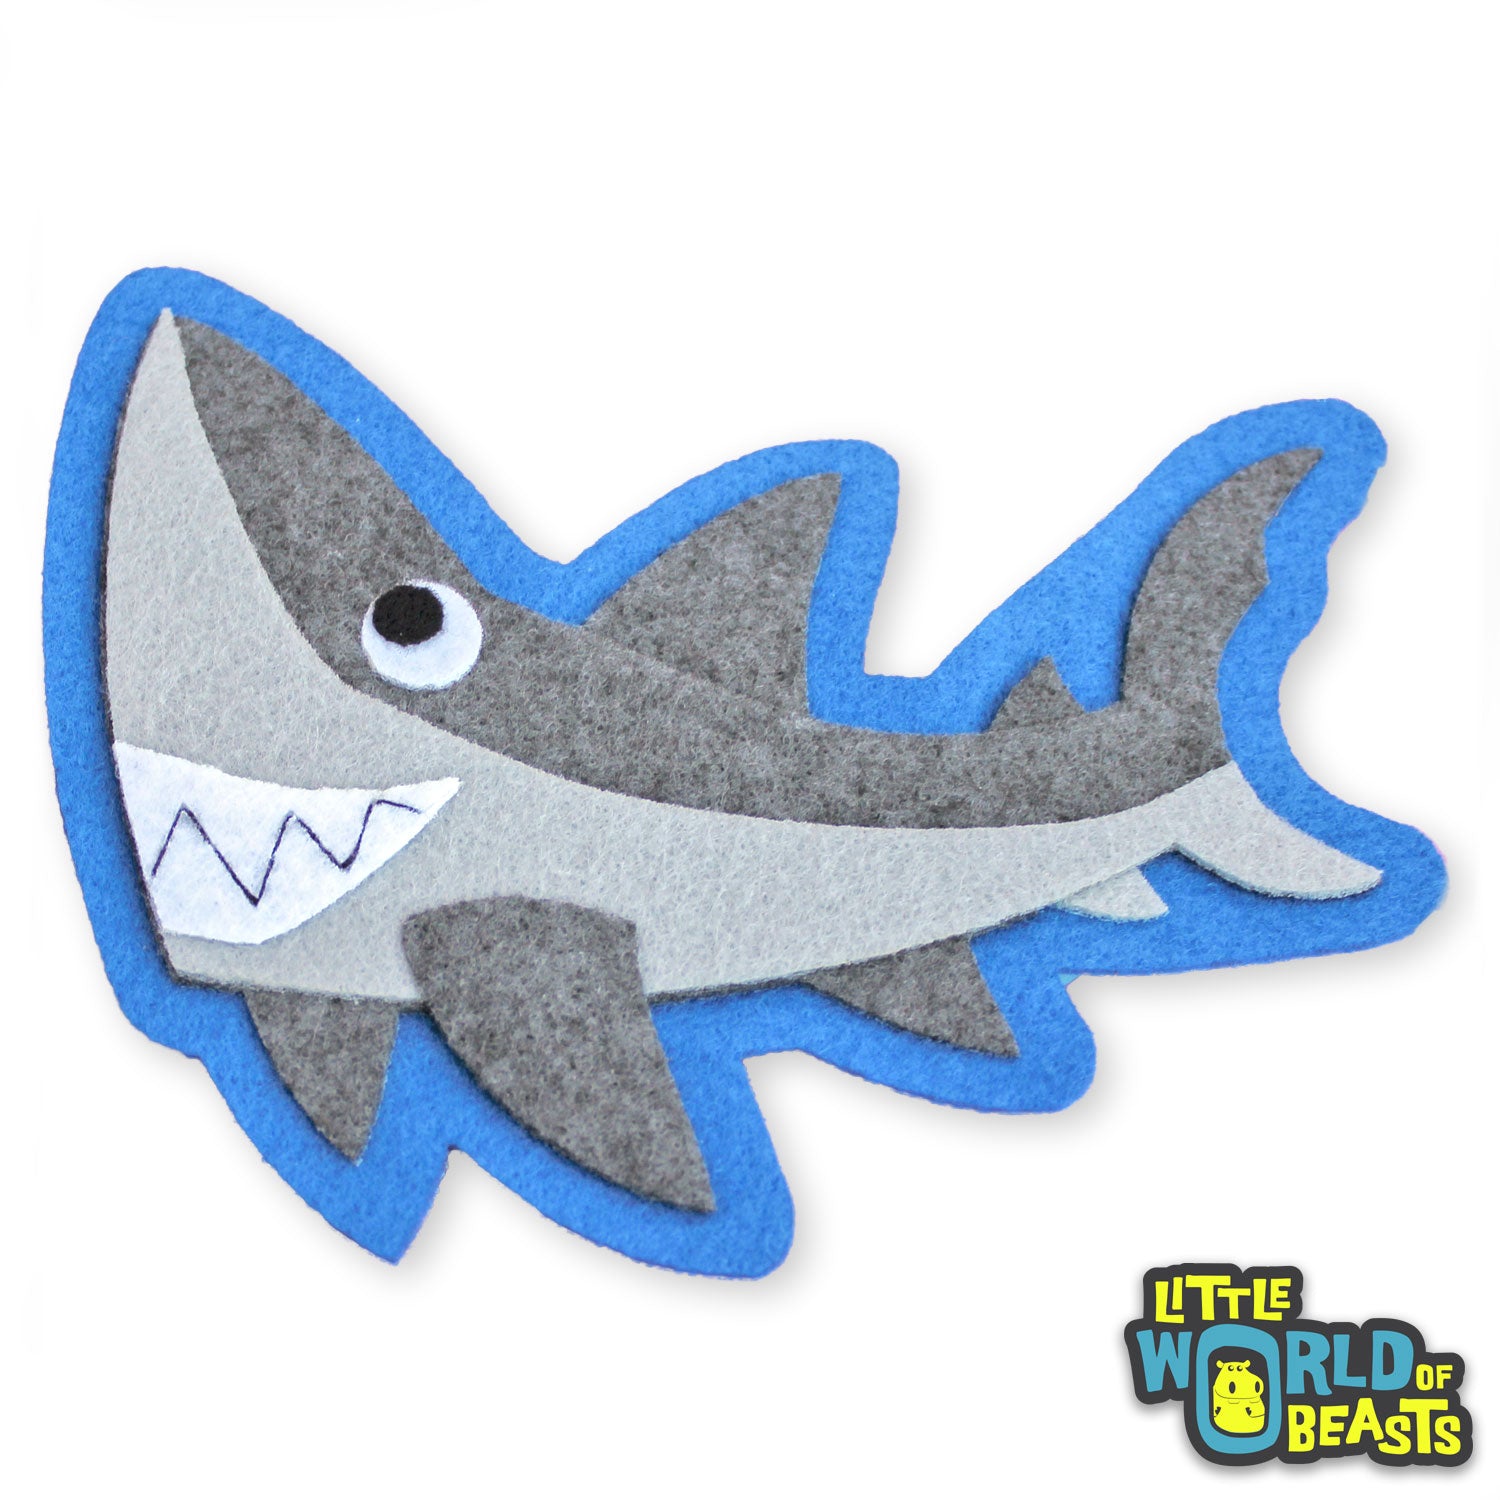 Derek the Great White Shark - Sew On or Iron on Patch